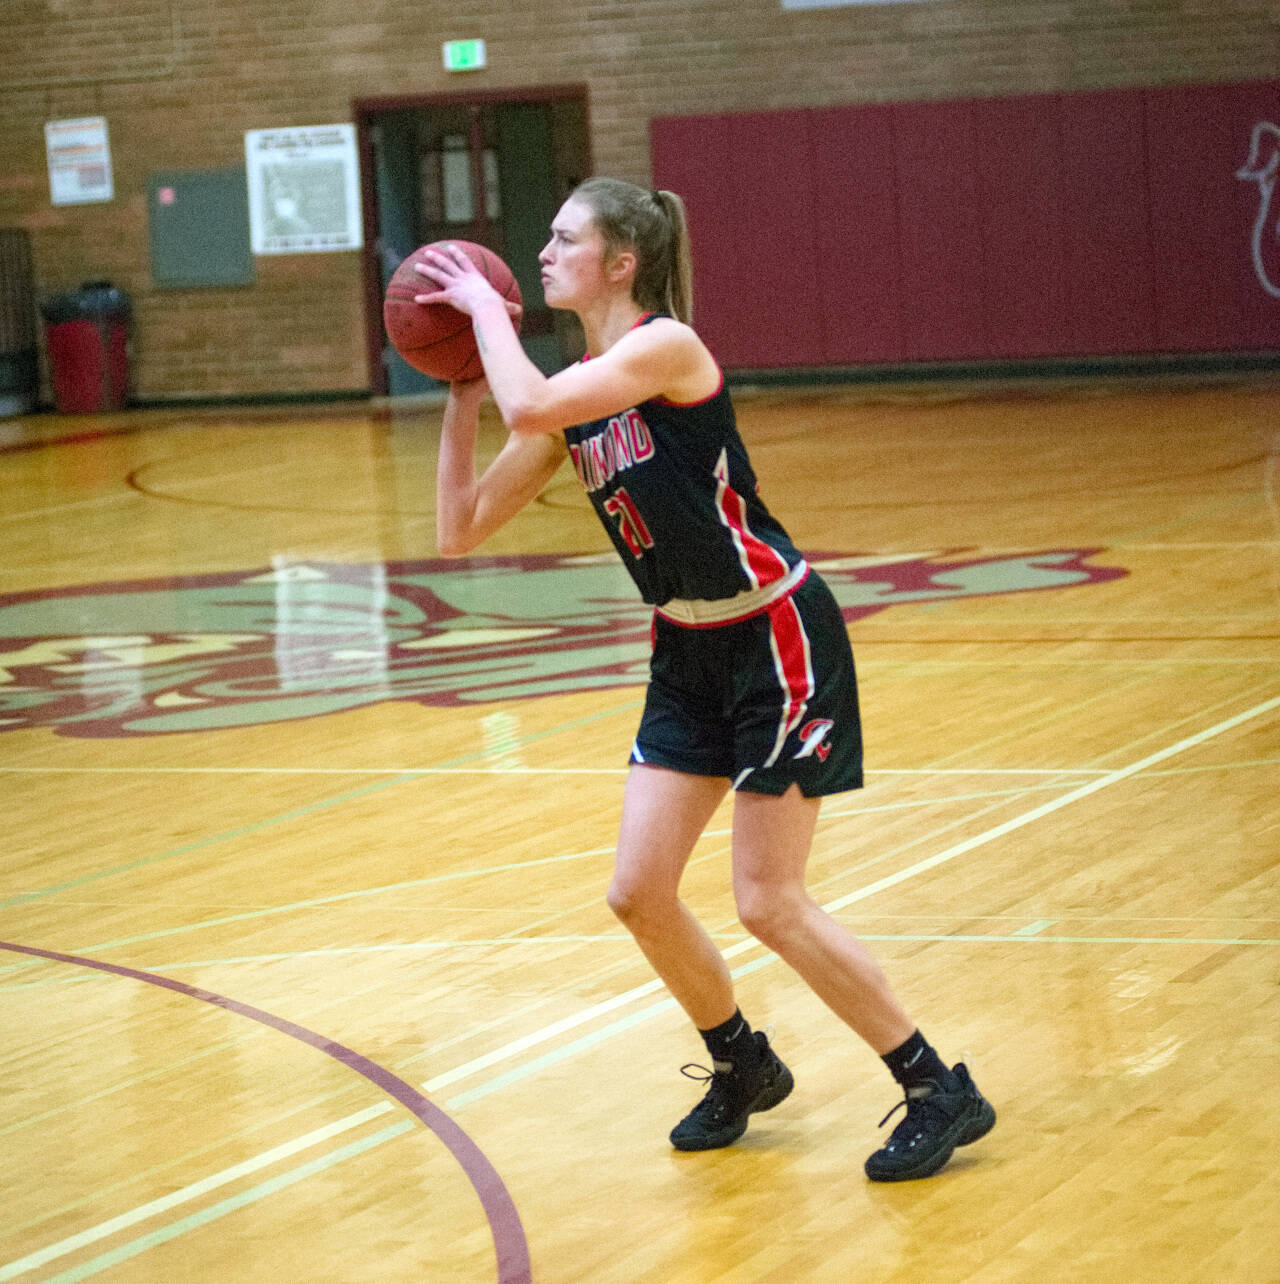 DAILY WORLD FILE PHOTO Raymond guard Kyra Gardner scored 30 points to lead the Seagulls to a 55-44 victory over Winlock on Friday. It was the first game Raymond has played in nearly a month.